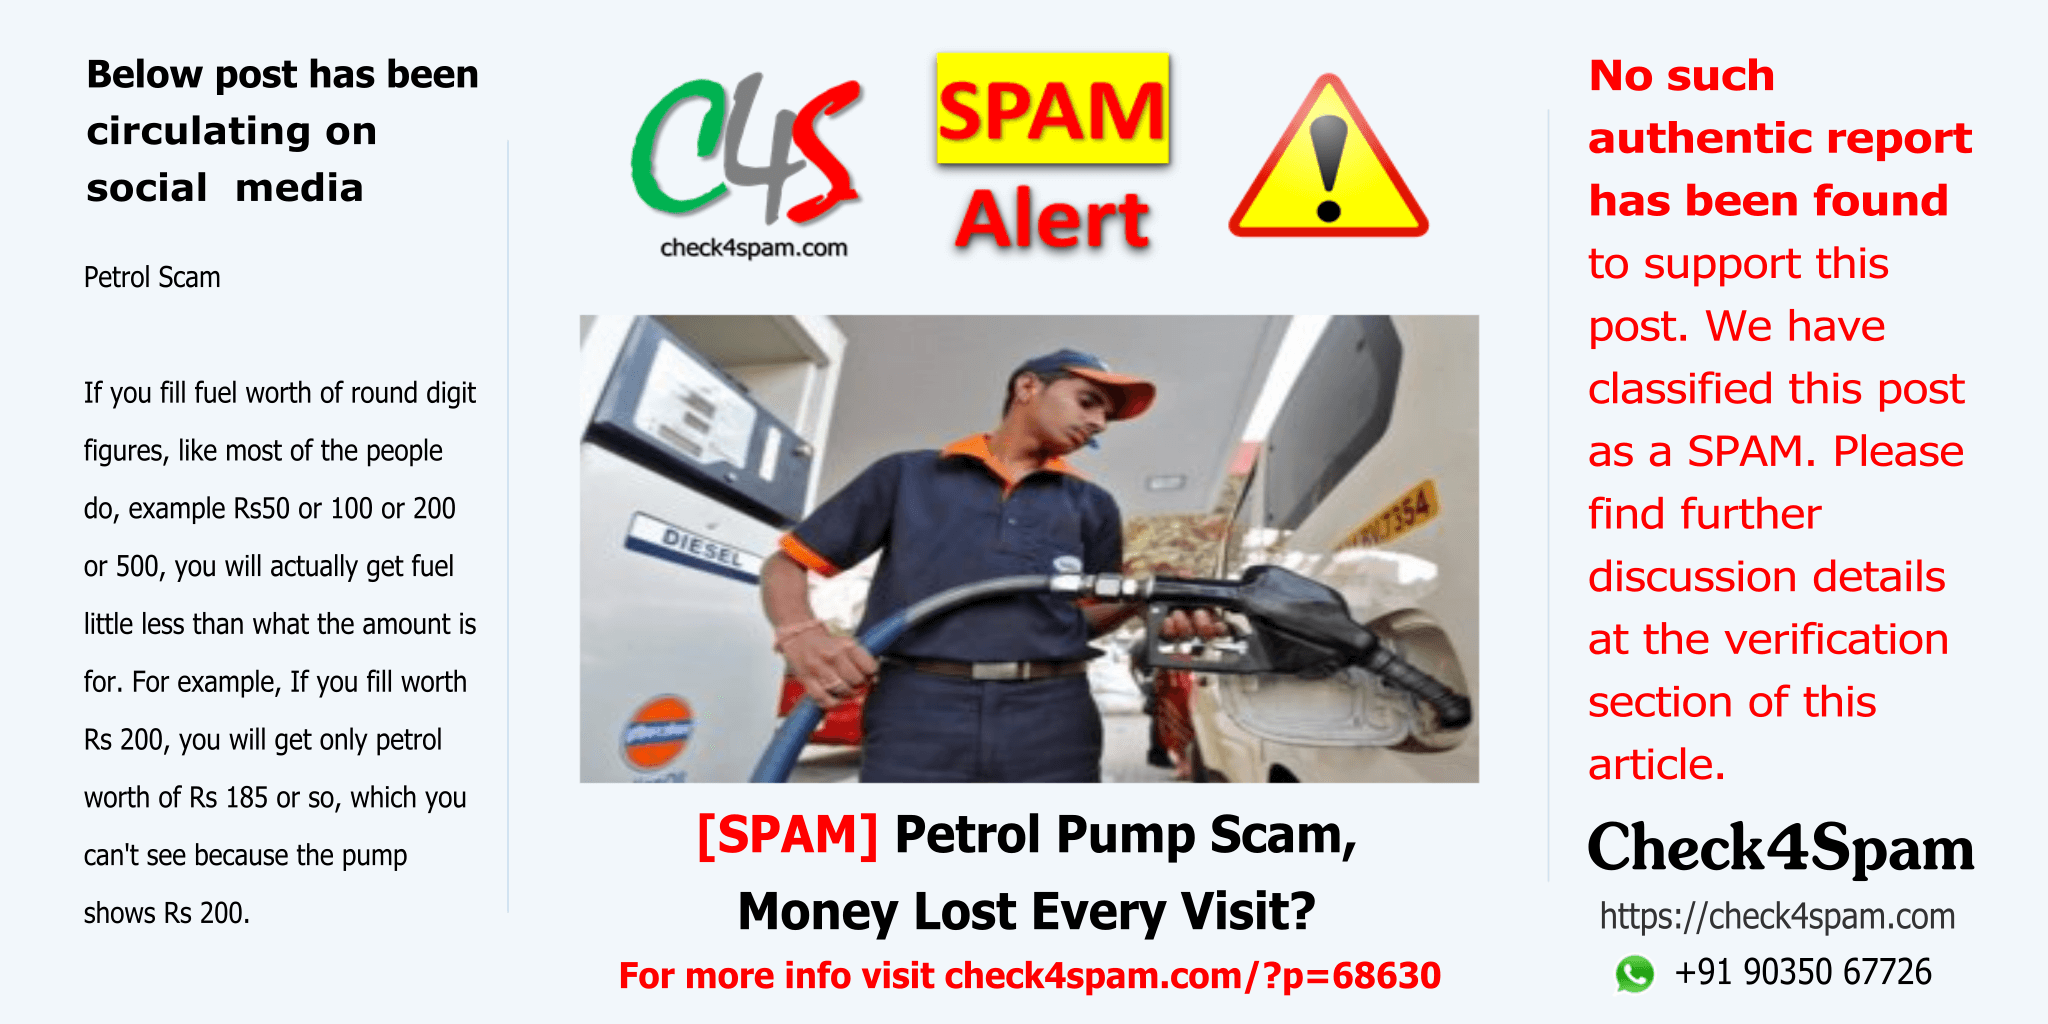 petrol pump scam money lost every visit - SPAM